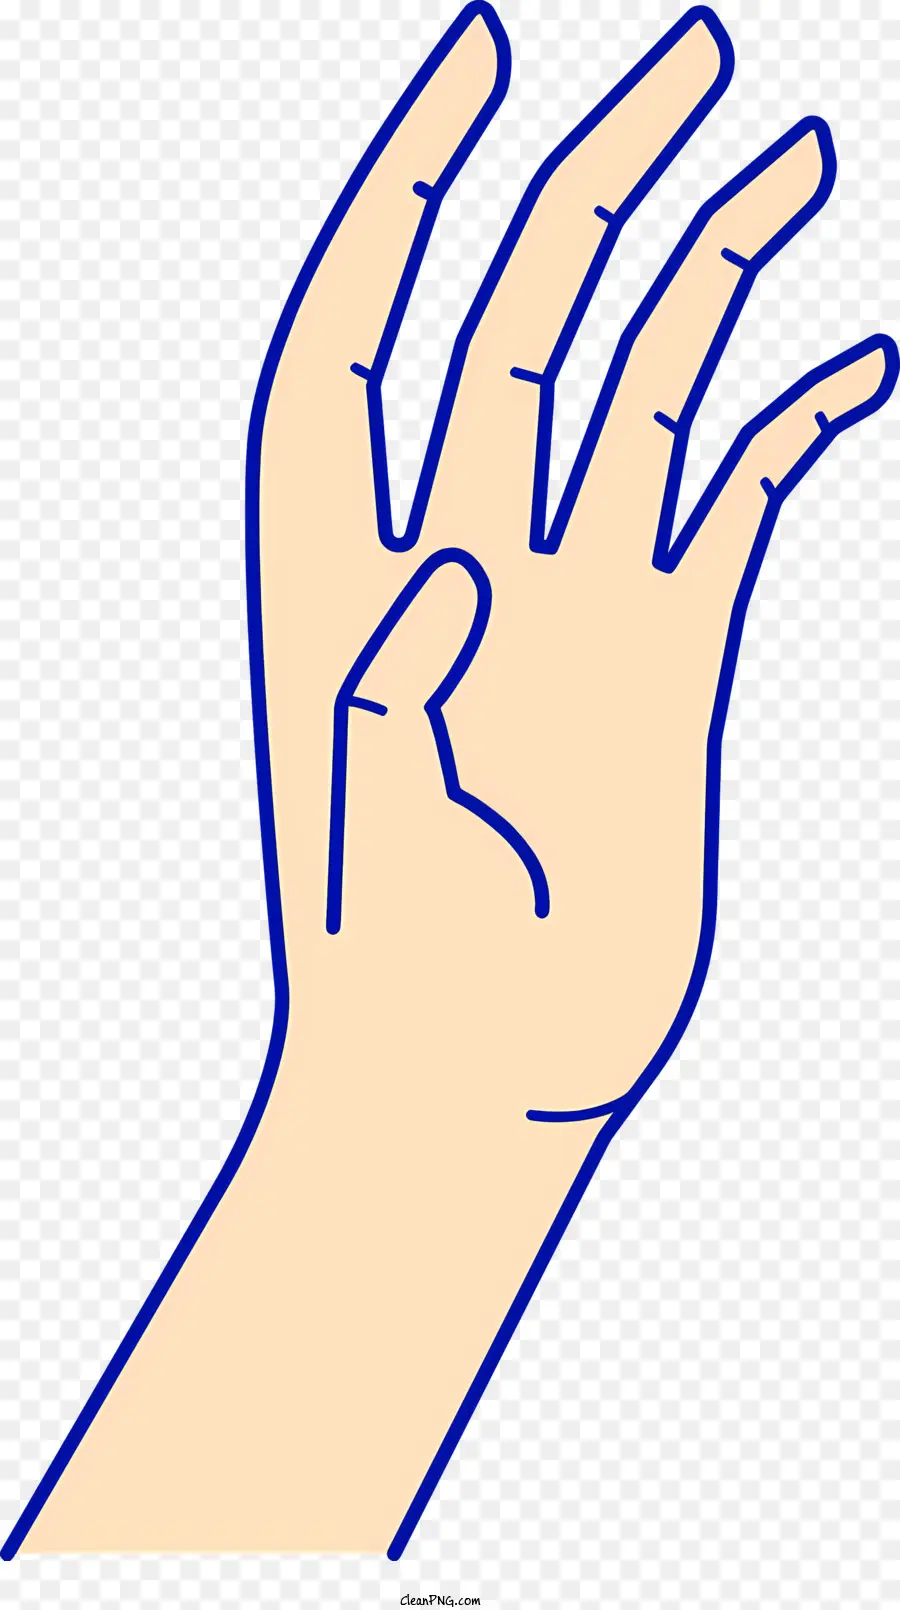 icon human hand fingers spread open grasp or hold onto blue hand